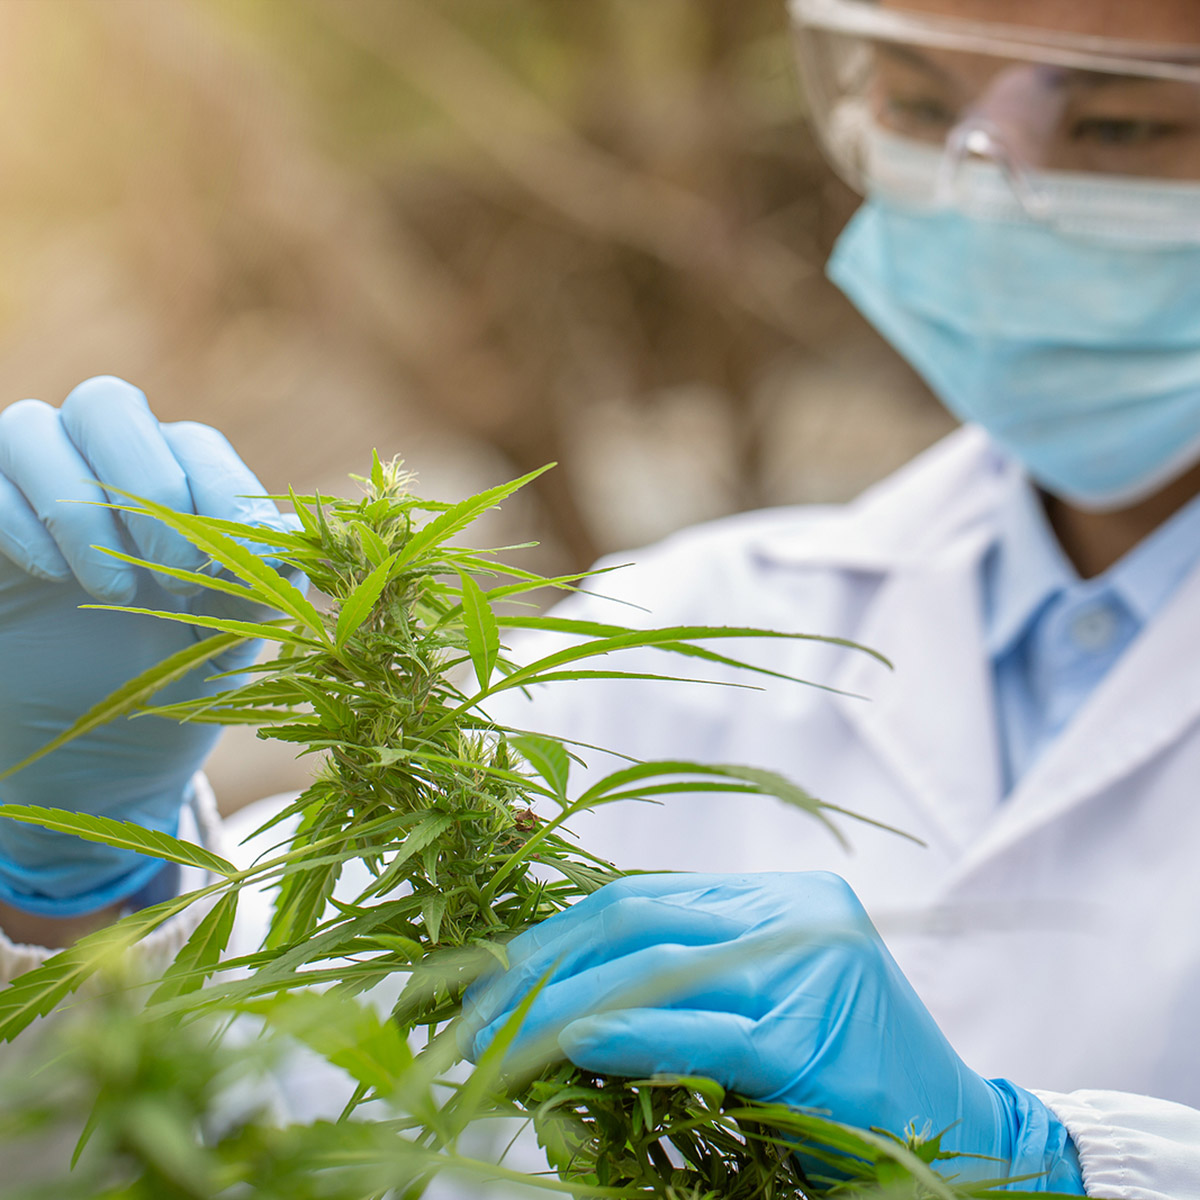 CCD student inspecting a cannabis plant